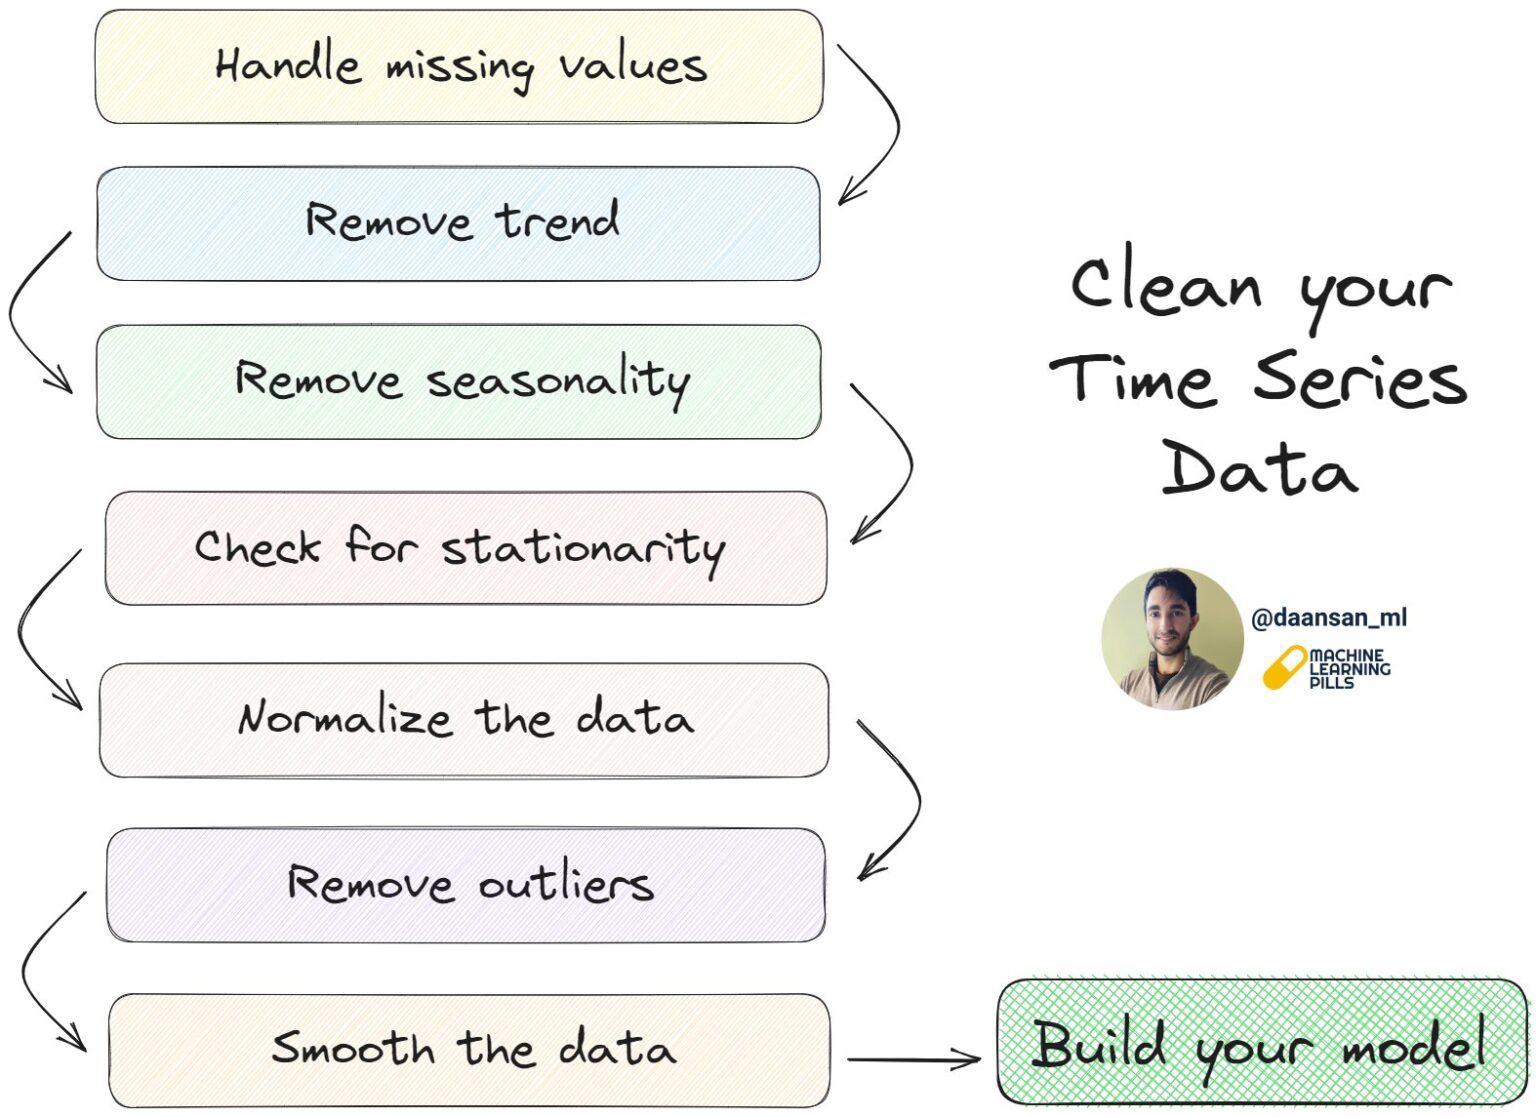 Clean your time series data